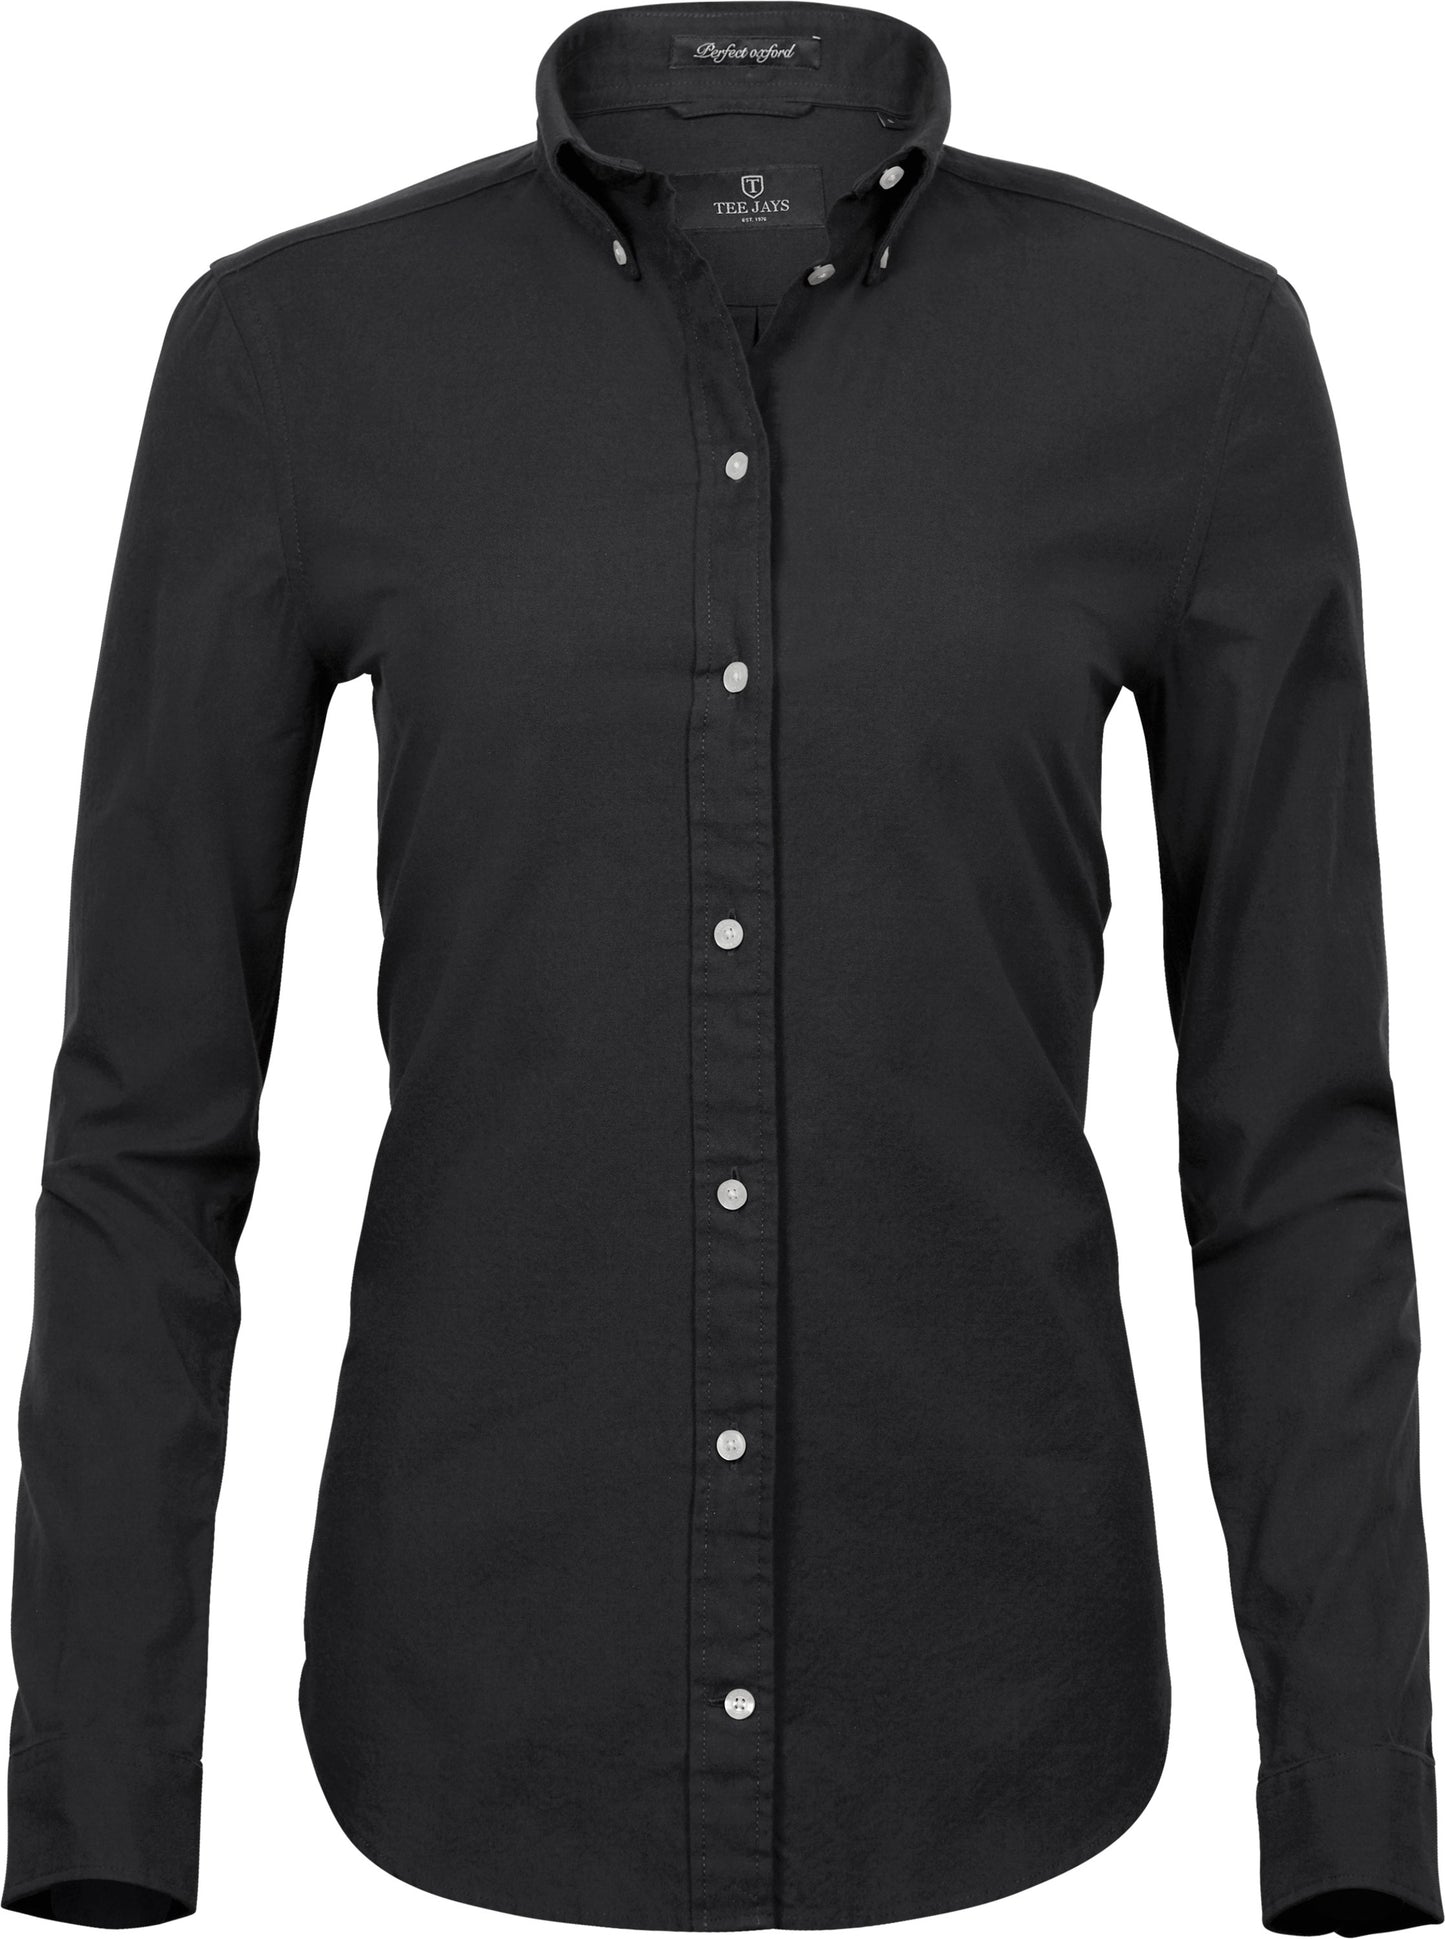 Women's Embroidered Shirt Black